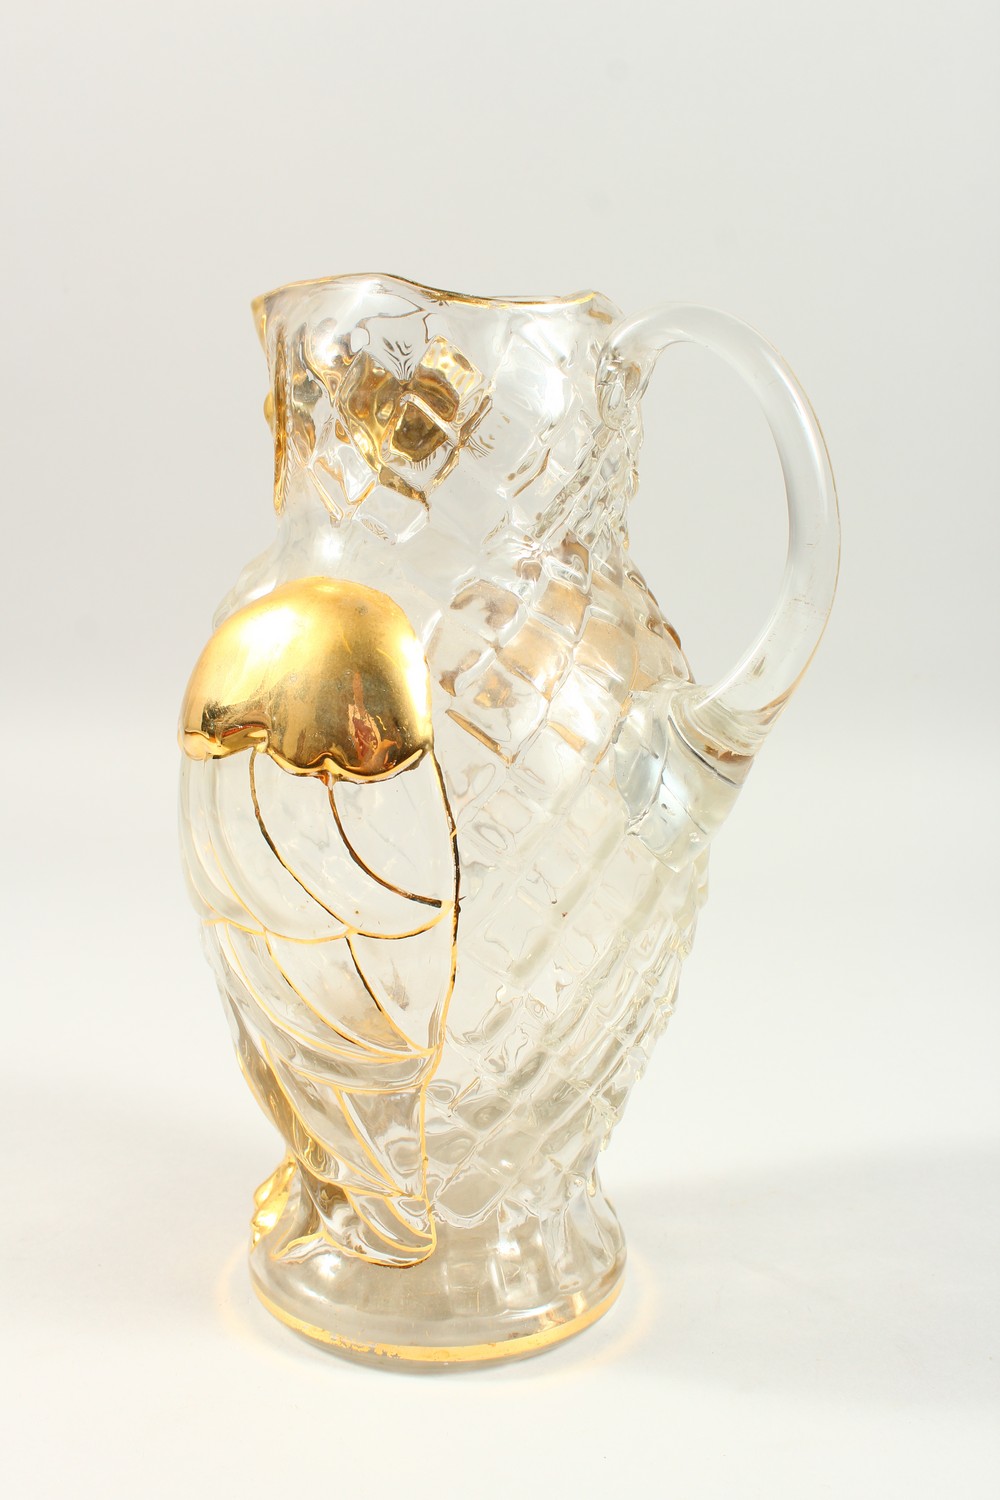 A MOULDED GLASS OWL SHAPE JUG, with gilded decoration. 26cms high. - Image 3 of 4